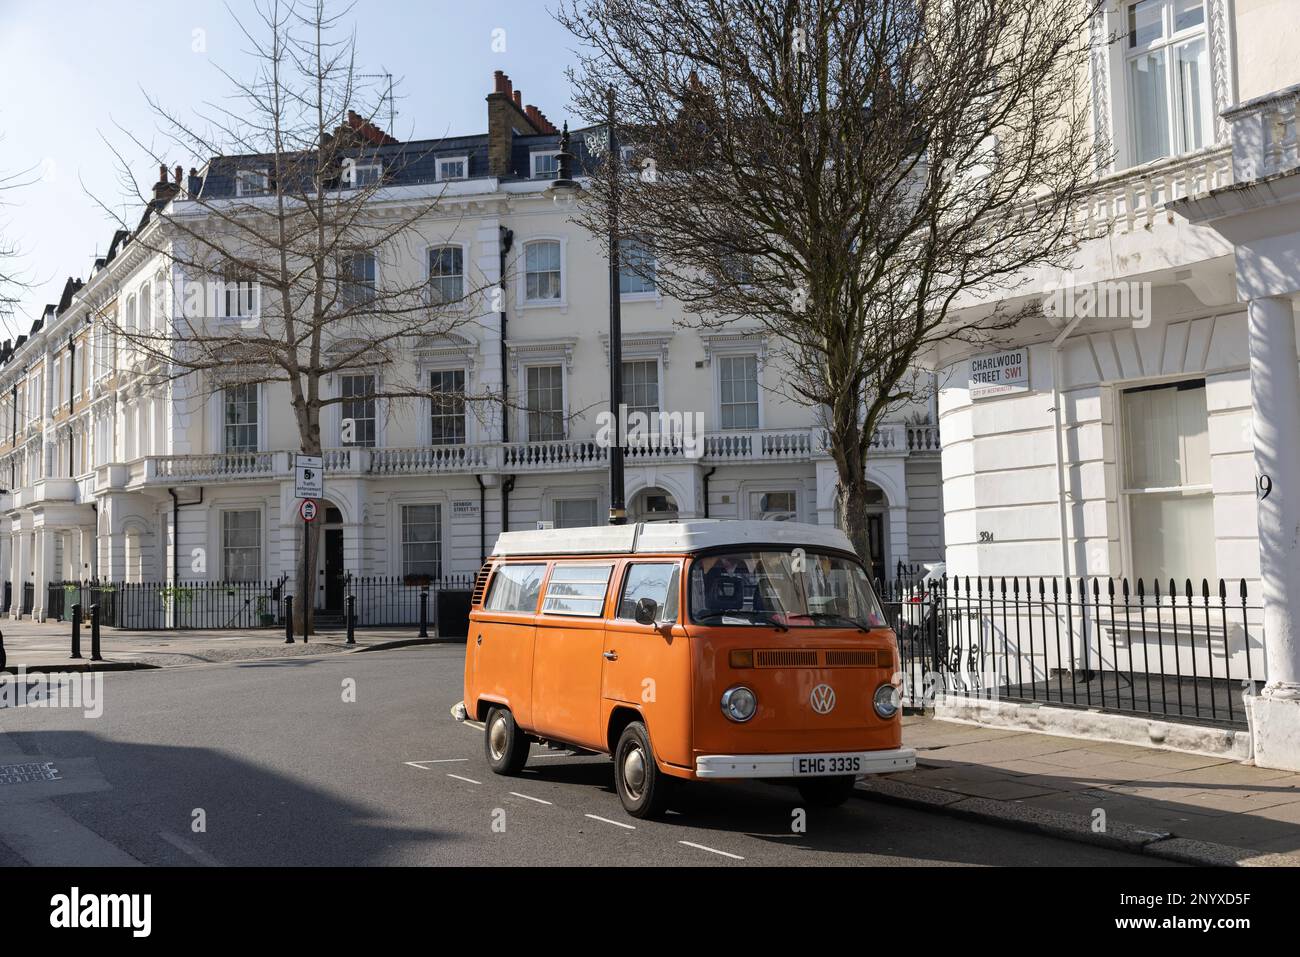 VW Mrk II Camper van parked on a residential street in Victoria, London, England, UK Stock Photo